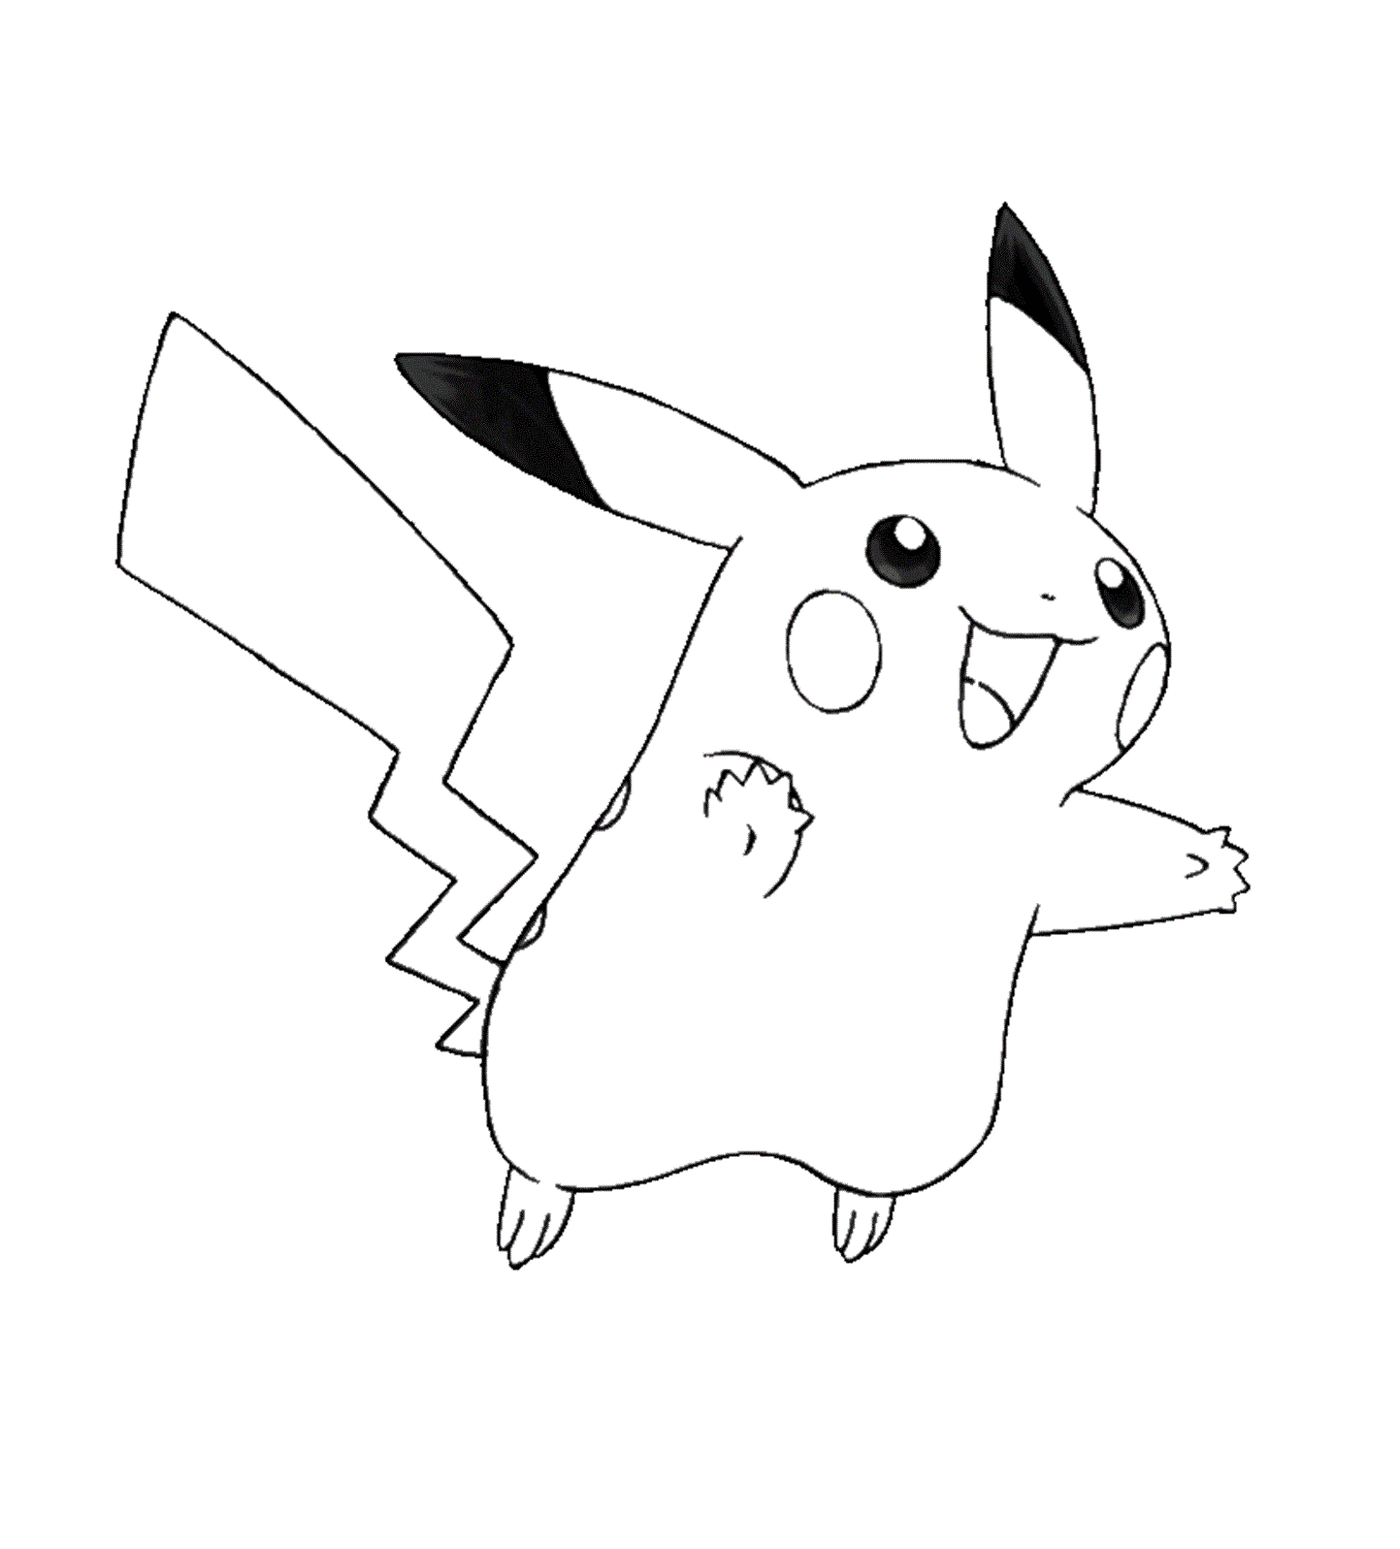  Pikachu with a quiet expression 